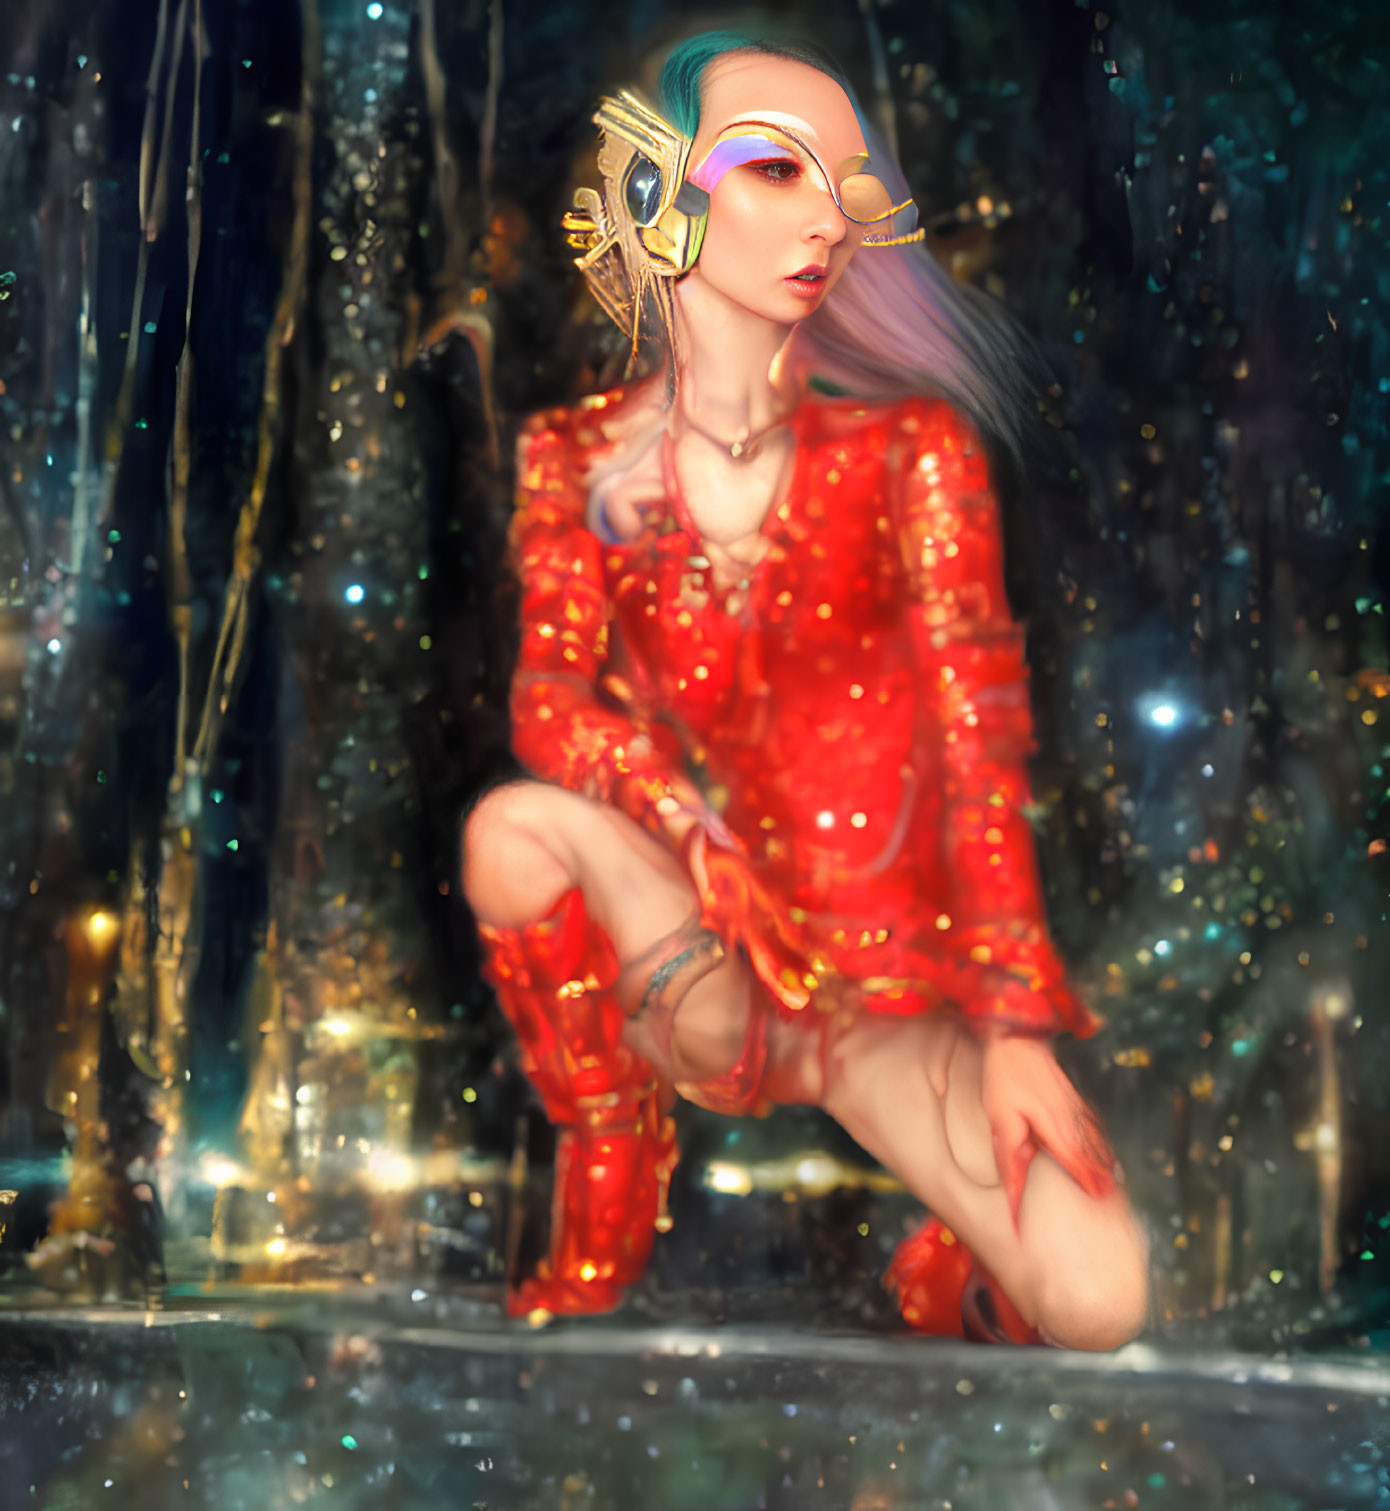 Fantasy illustration of person in red outfit with golden accessories in magical setting